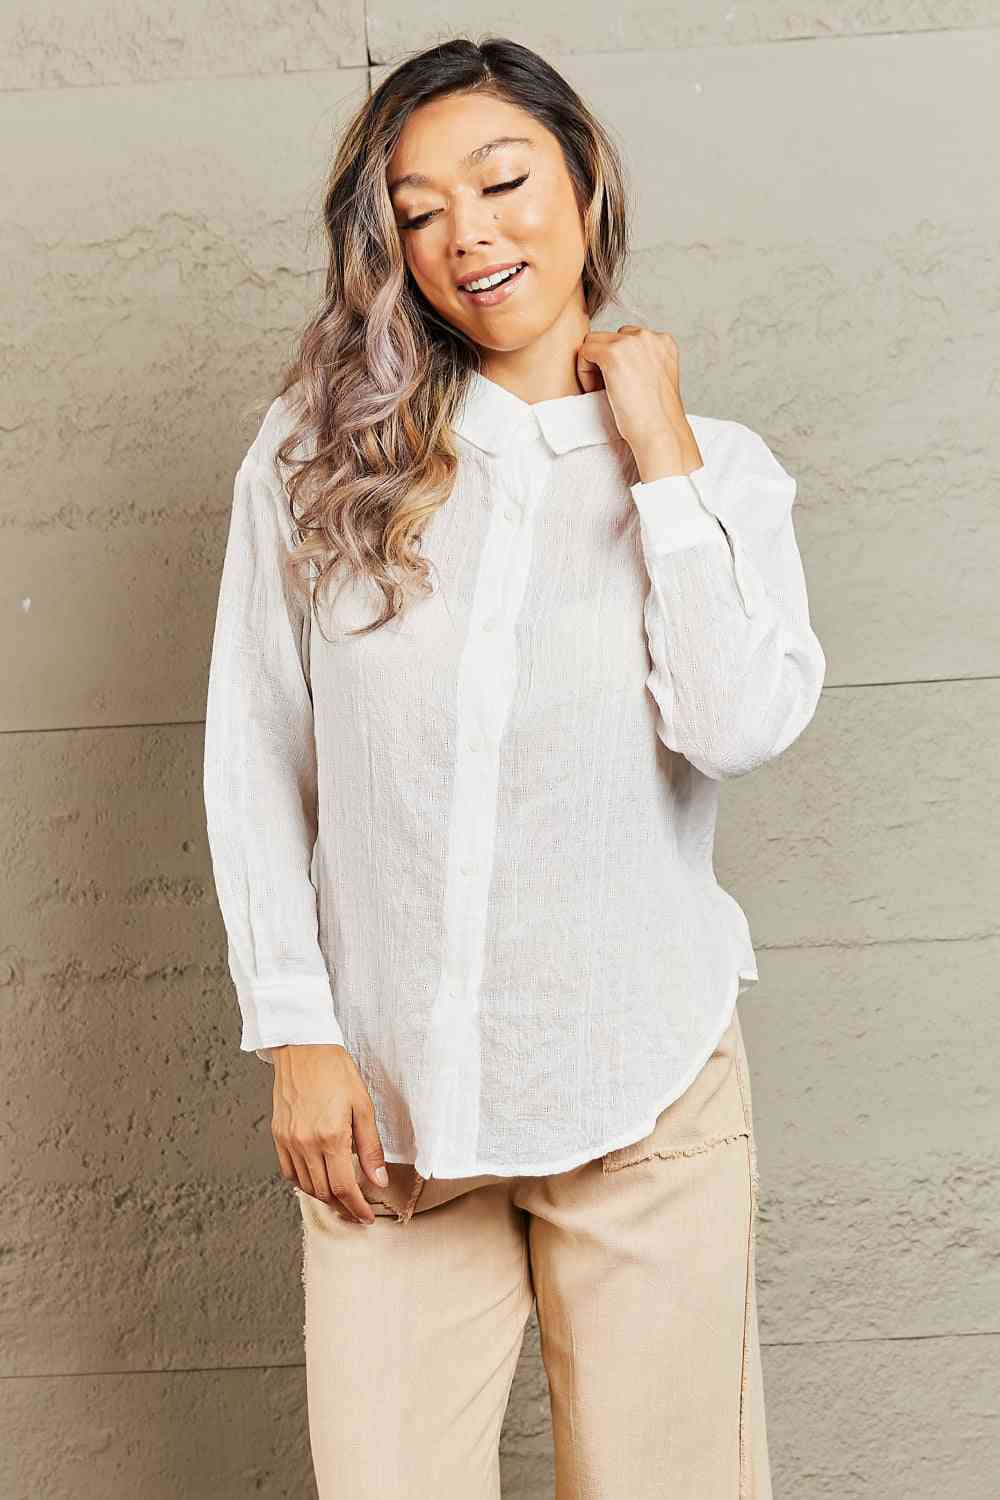 Take Me Out Lightweight Button Down Top - Camis & Tops - Shirts & Tops - 3 - 2024